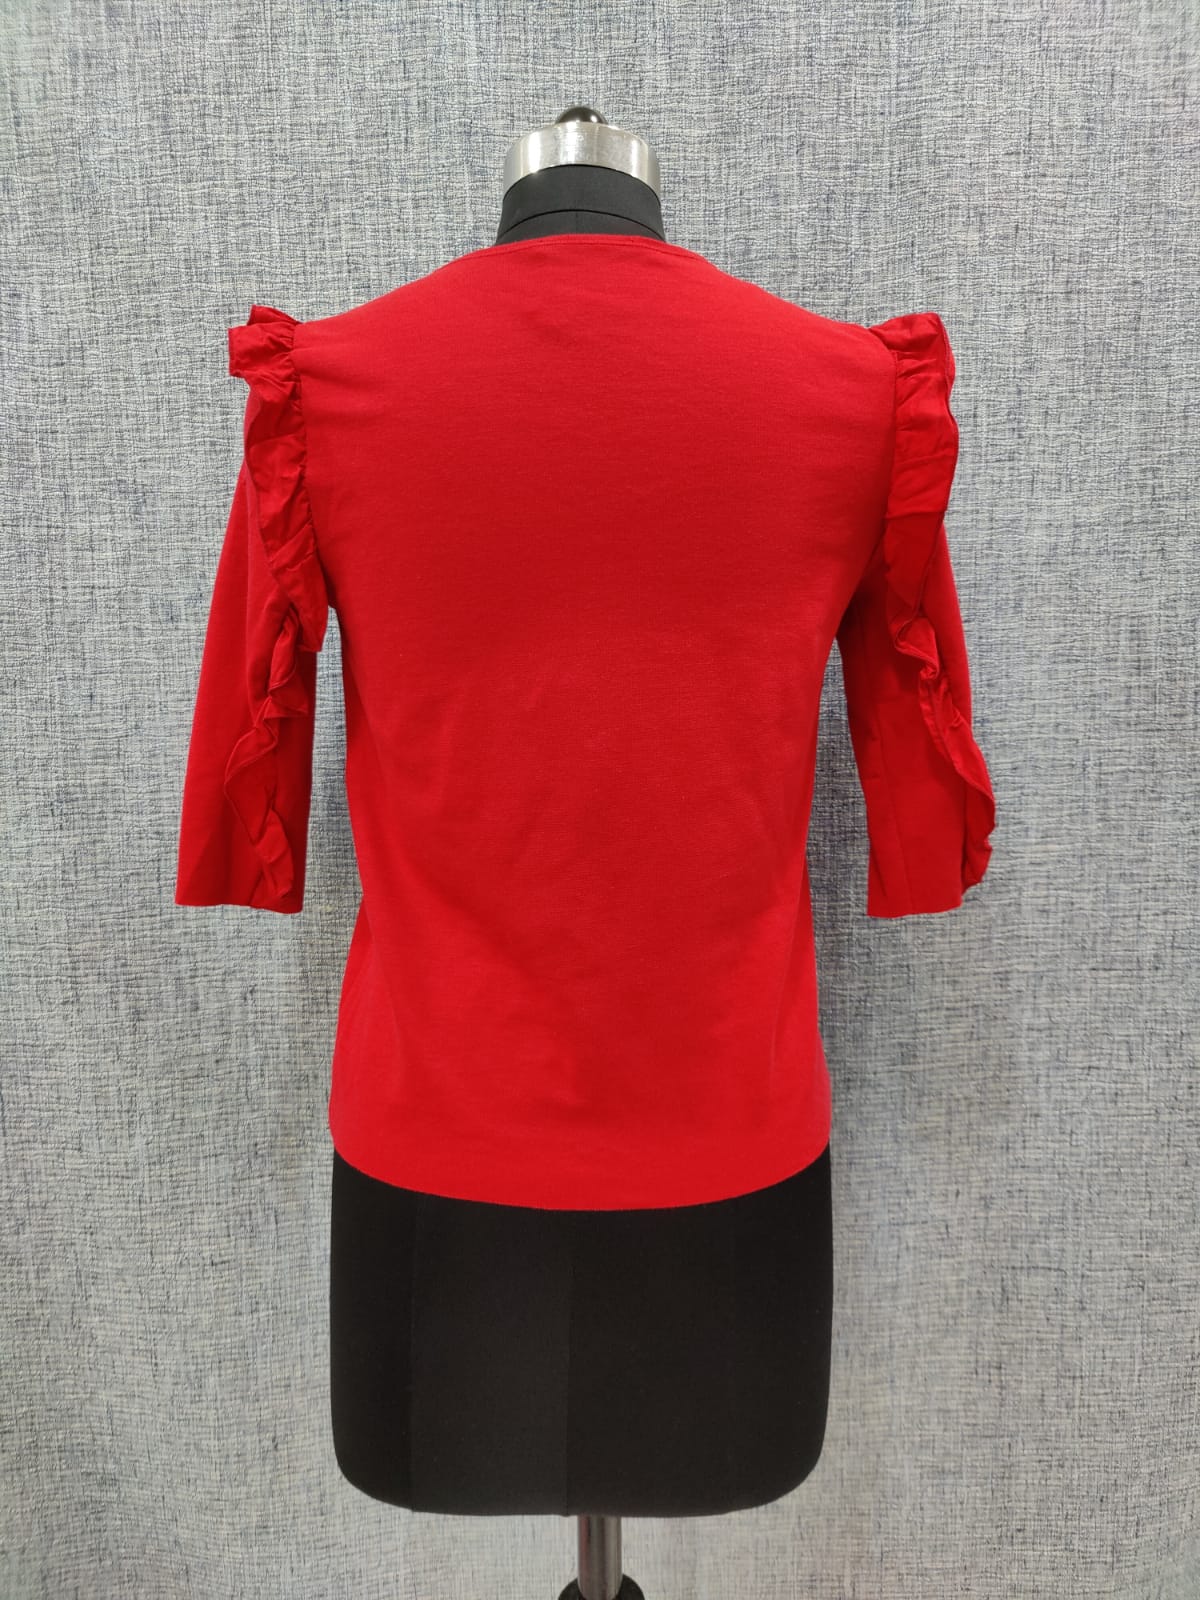 ZARA Red Top with Frilled Sleeves | Relove